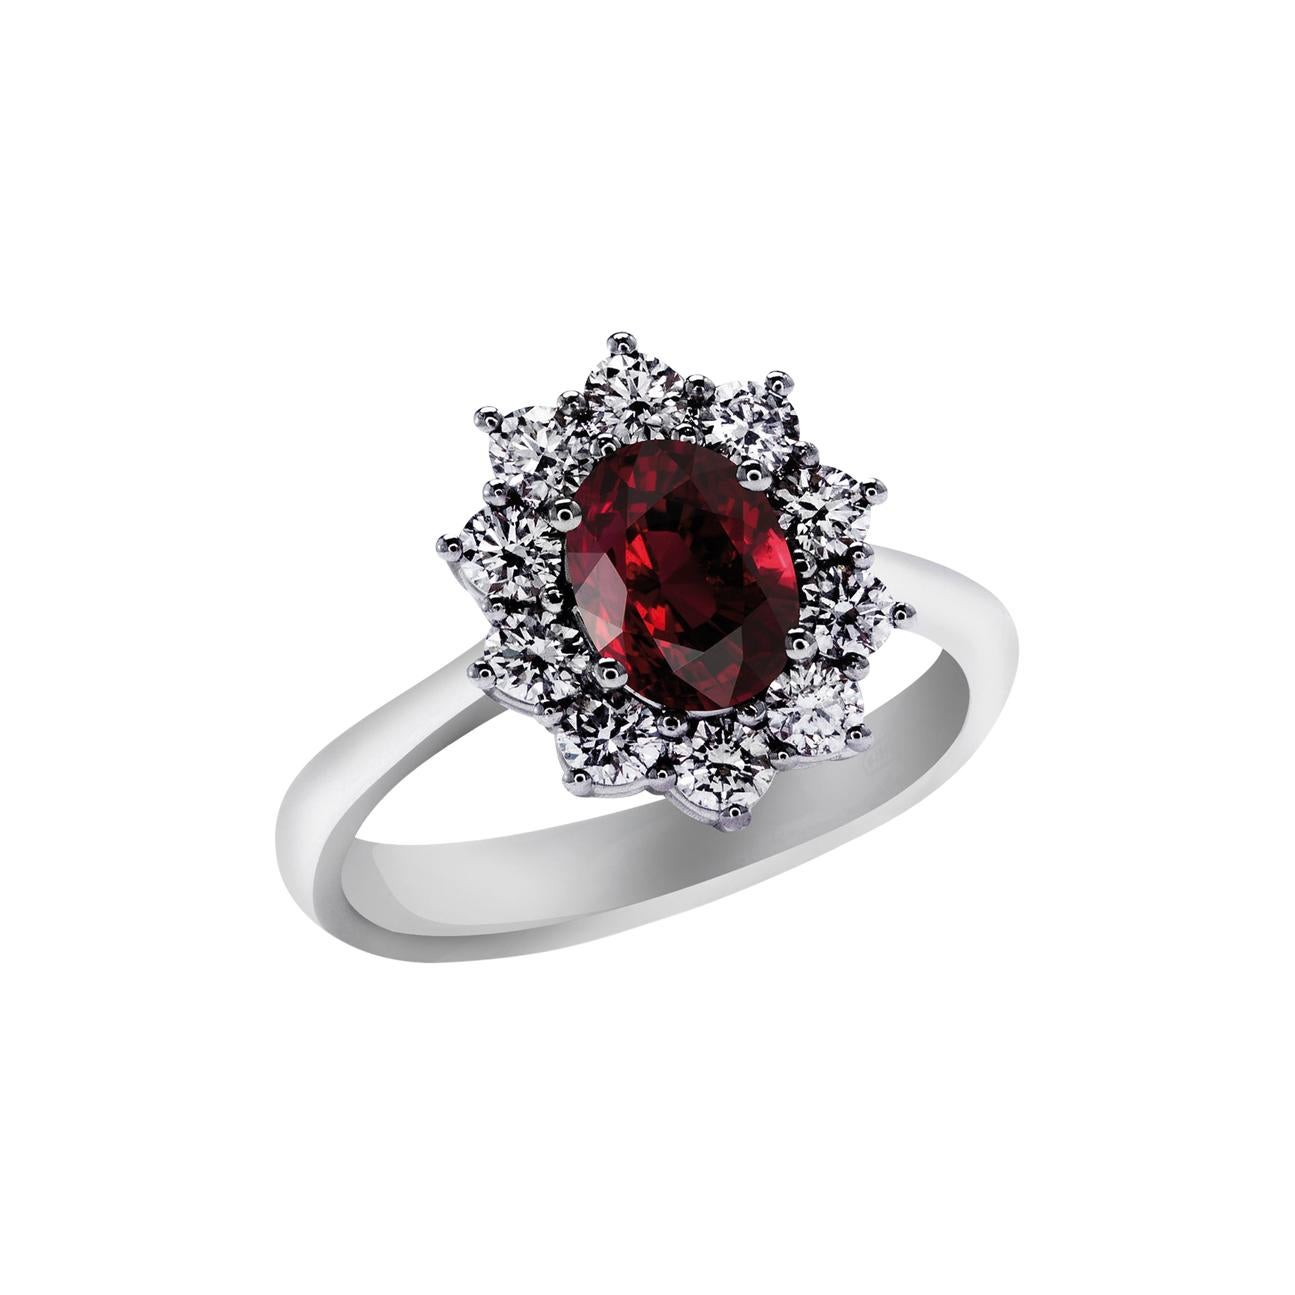 1.79 Carat Ruby and 0.86 Carat Diamonds set in 18kt White Gold Ring